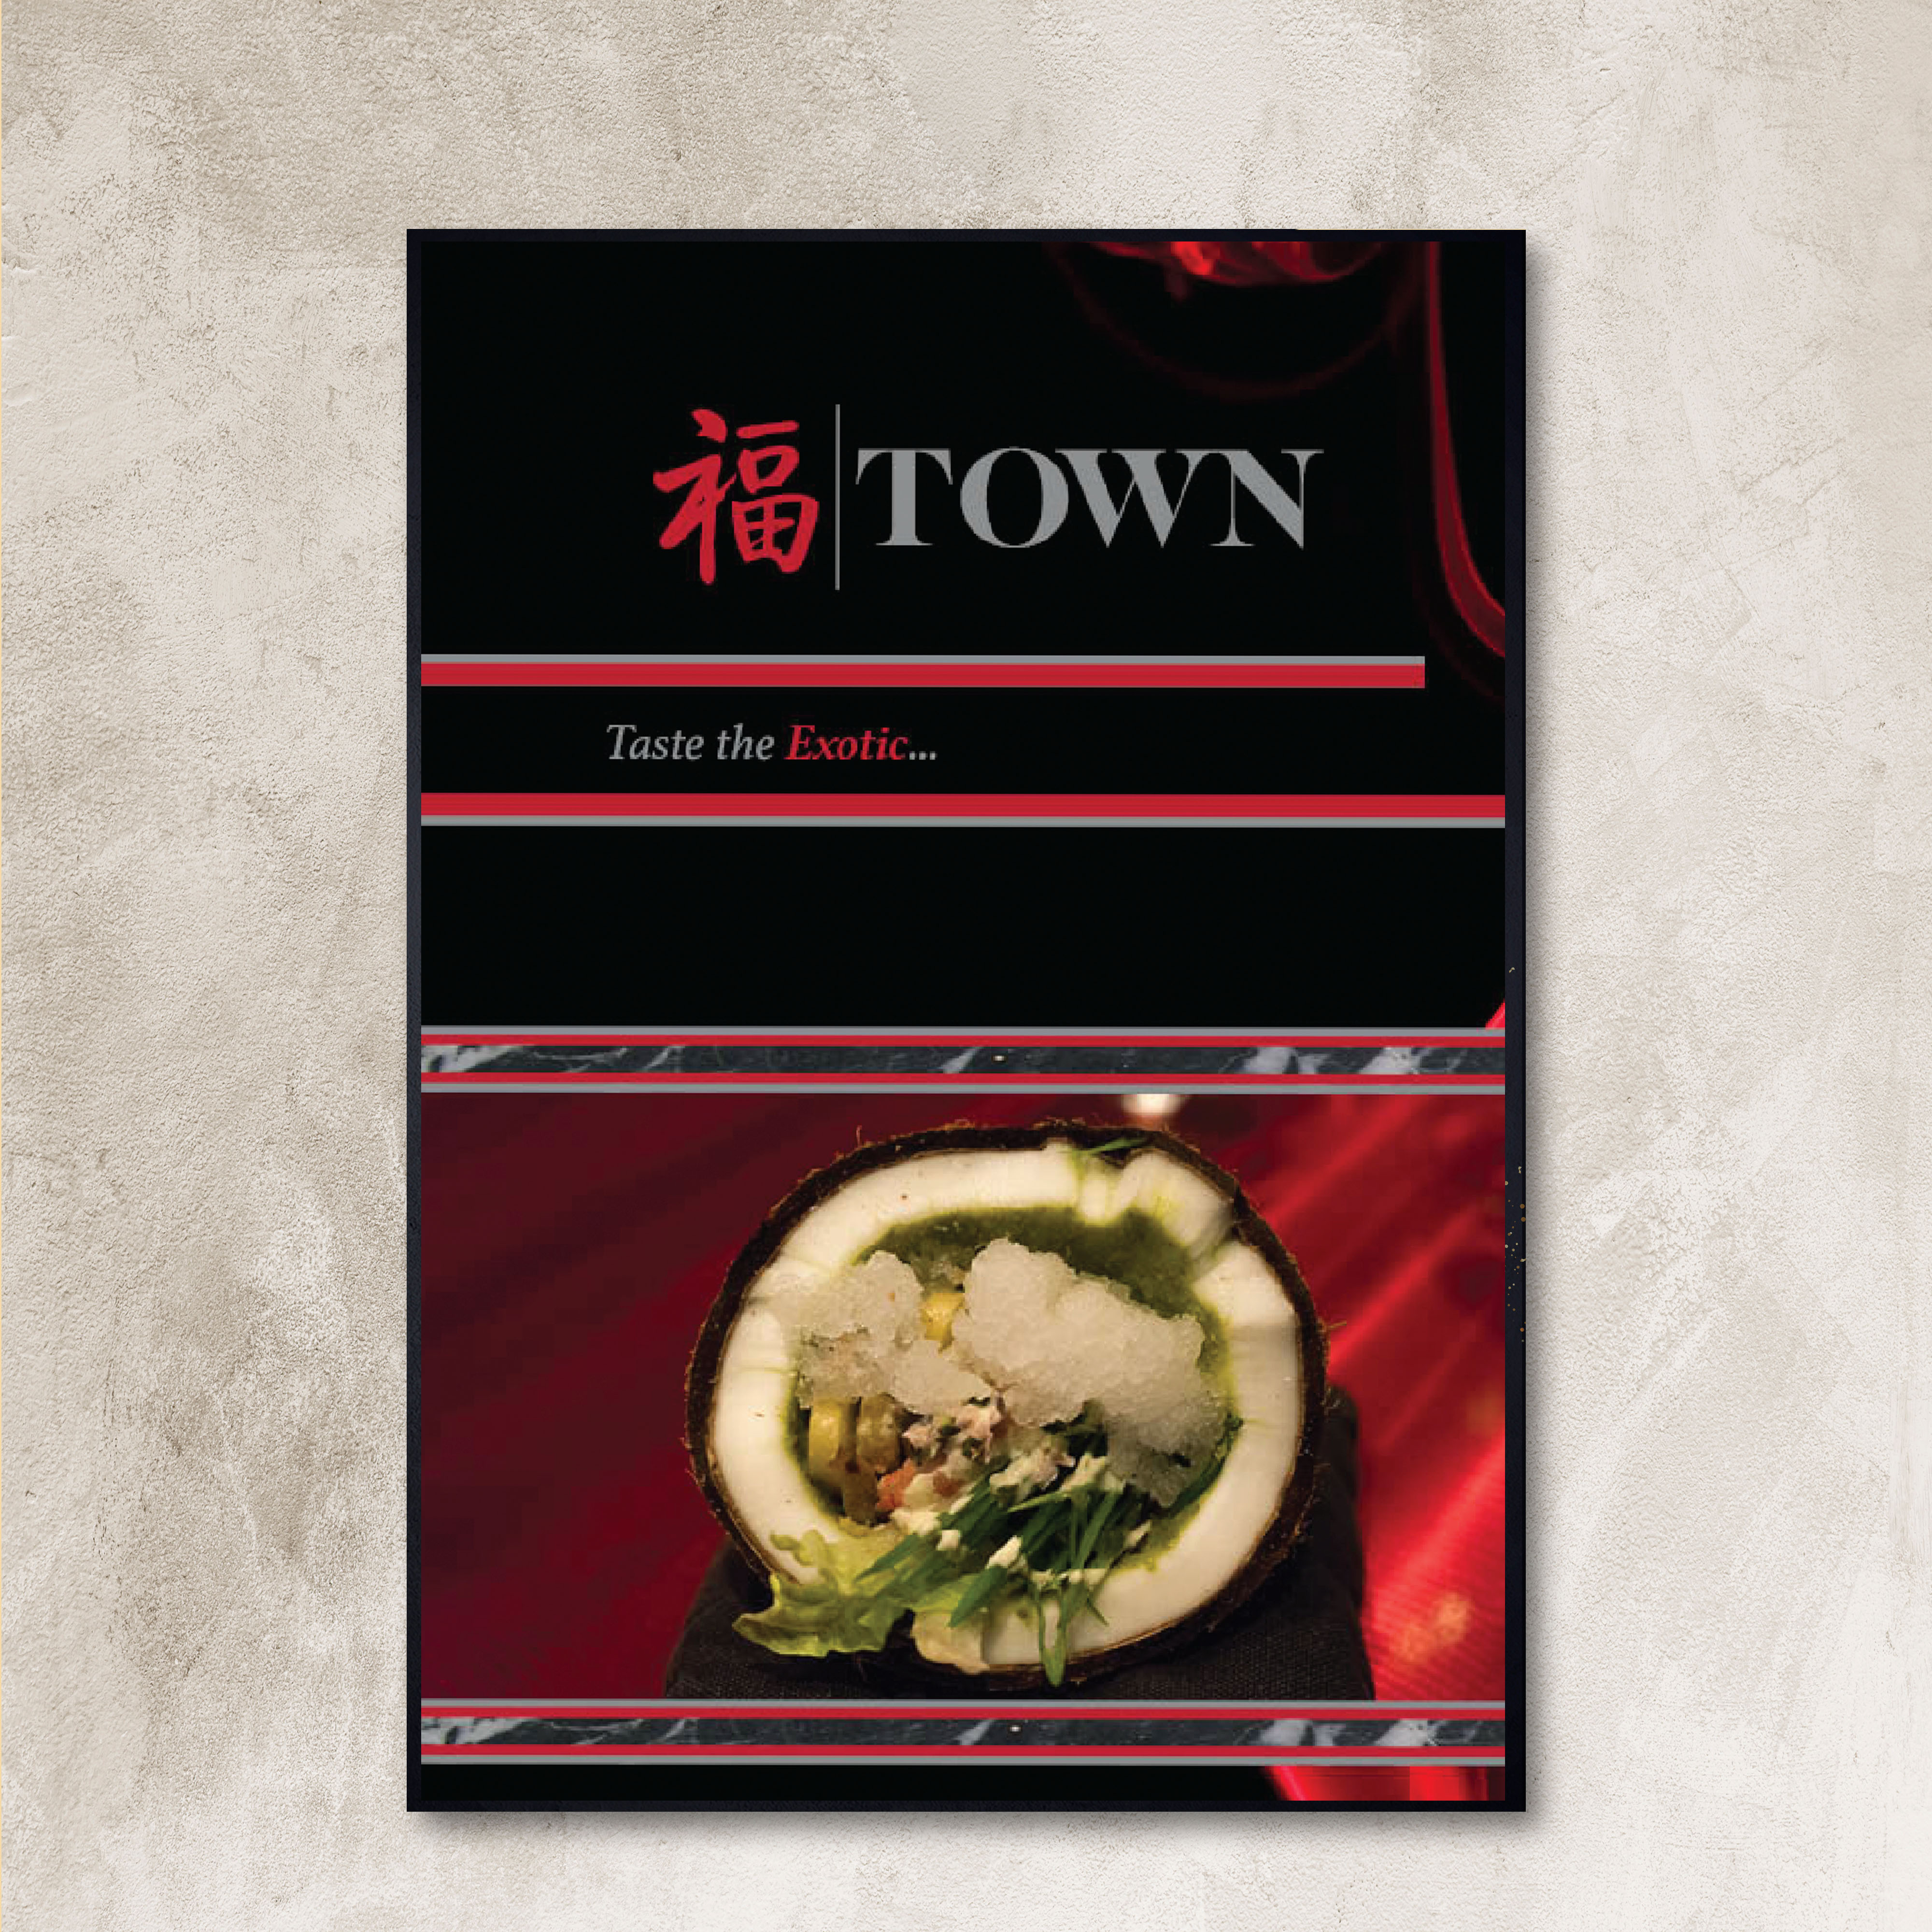 Menu Cover for highend Chinese Restaurant. Town Logo, and picture of cocanut stuffed with meat and garnish.